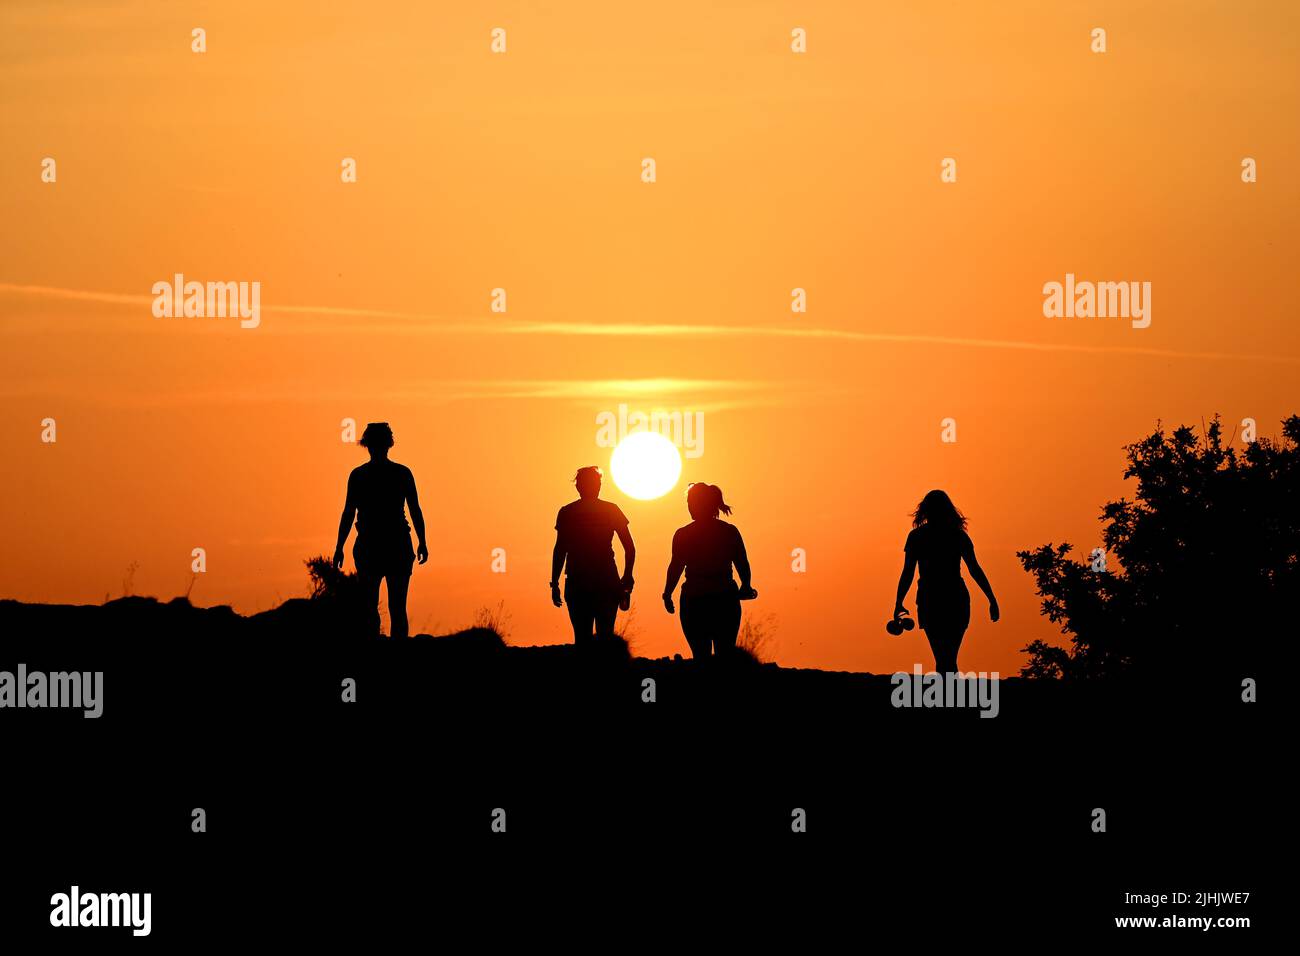 The Wrekin, Telford, Shropshire, Uk. July 19th 2022. Early risers beating the heat. Four ladies running and walking the Wrekin Hill in Shropshire at sunrise to beat the soaring temperatures in the Uk heatwave. Credit: Sam Bagnall /Alamy Live News Stock Photo